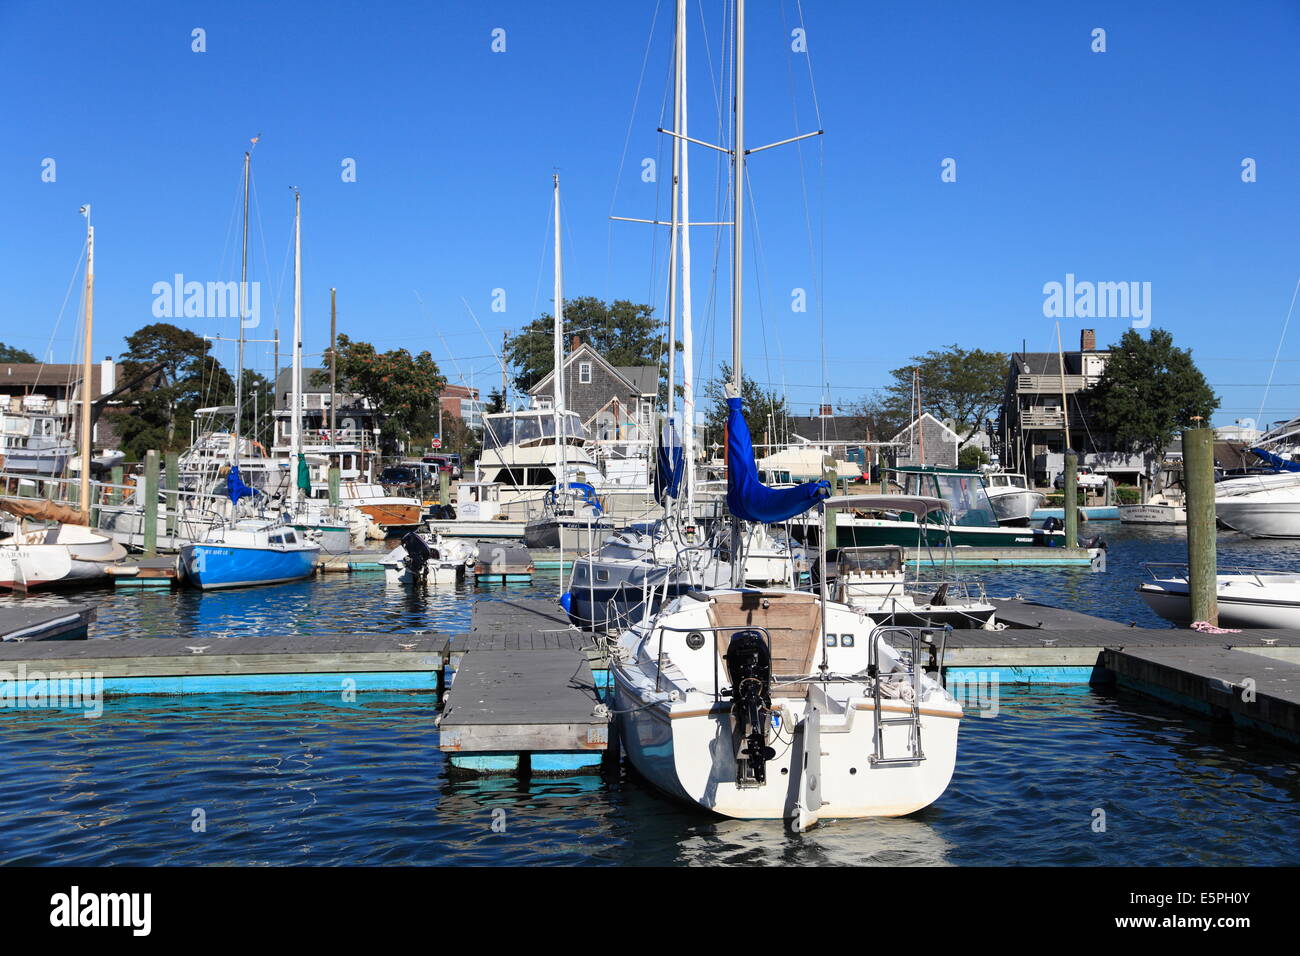 Boats in port, Harbor, Hyannis, Cape Cod, Massachusetts, New England, United States of America, North America Stock Photo